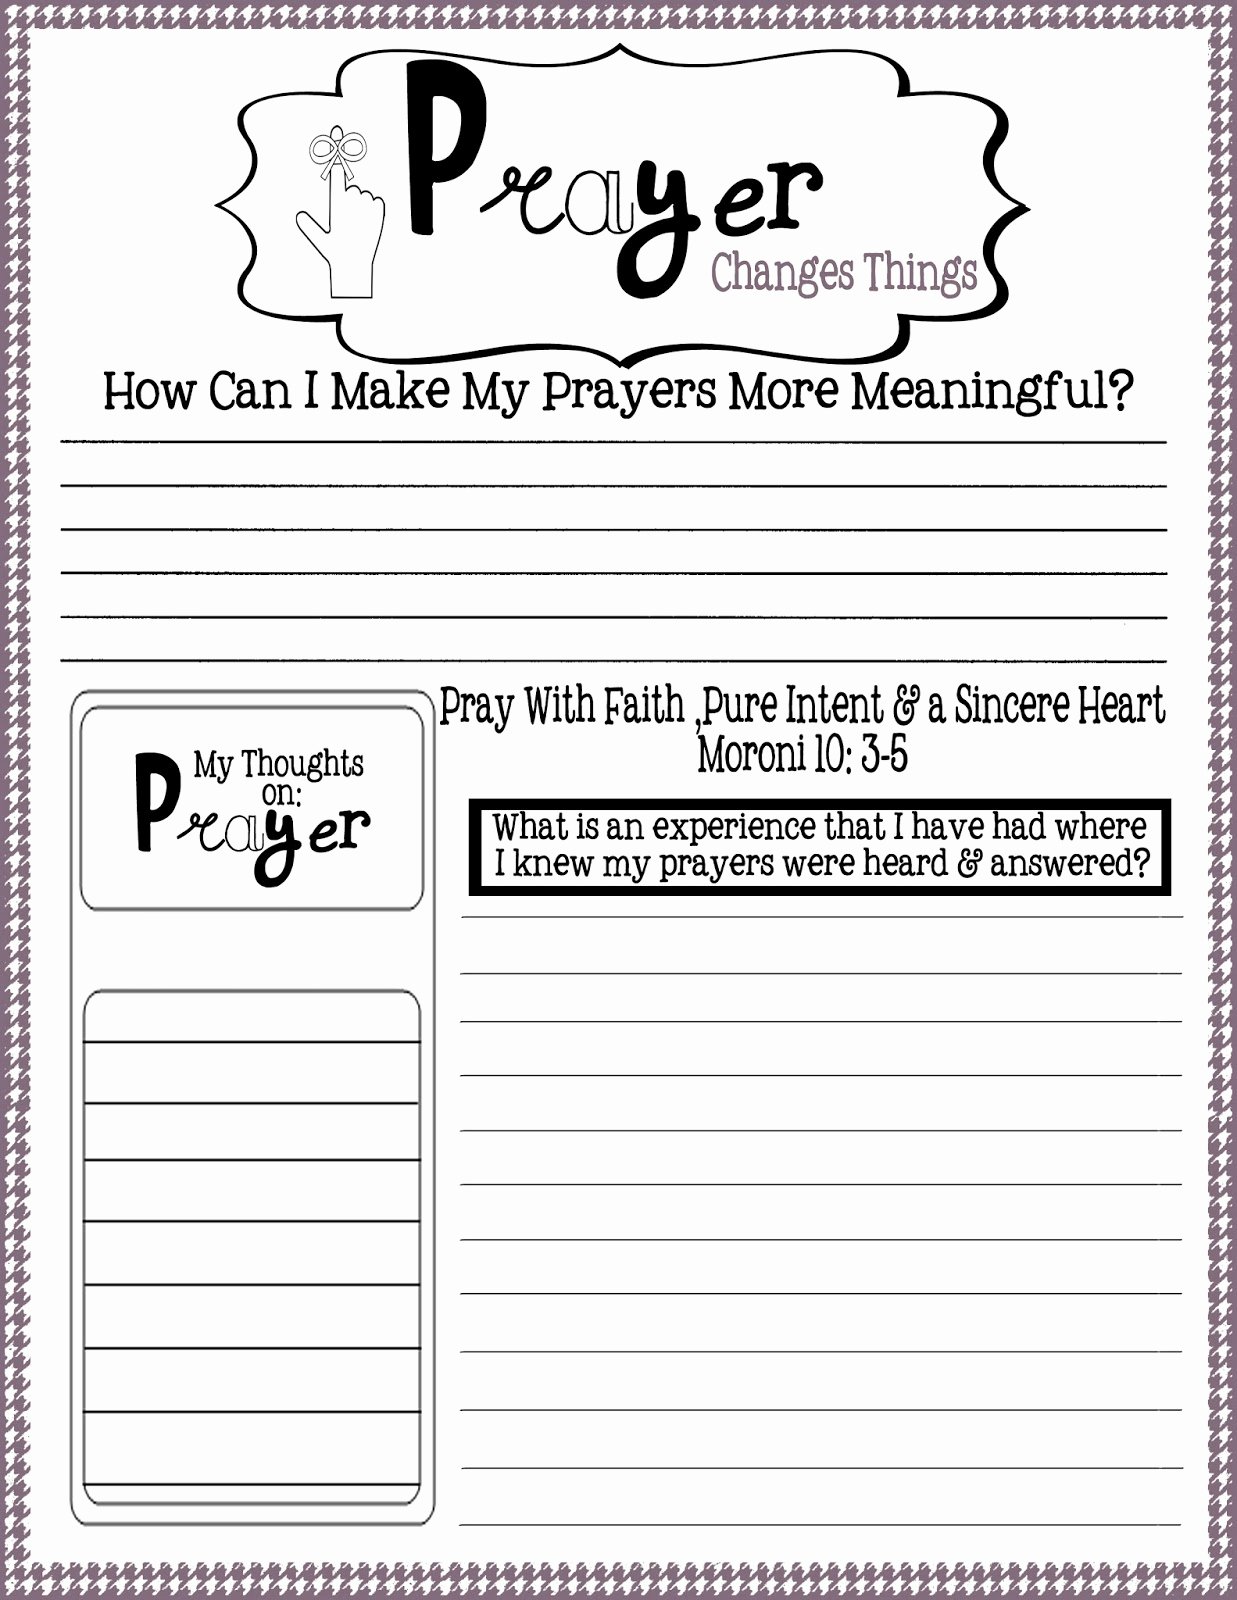 Prayer Request forms Templates Fresh Autumn Bennett Yw Lesson How Can I Make My Prayers More